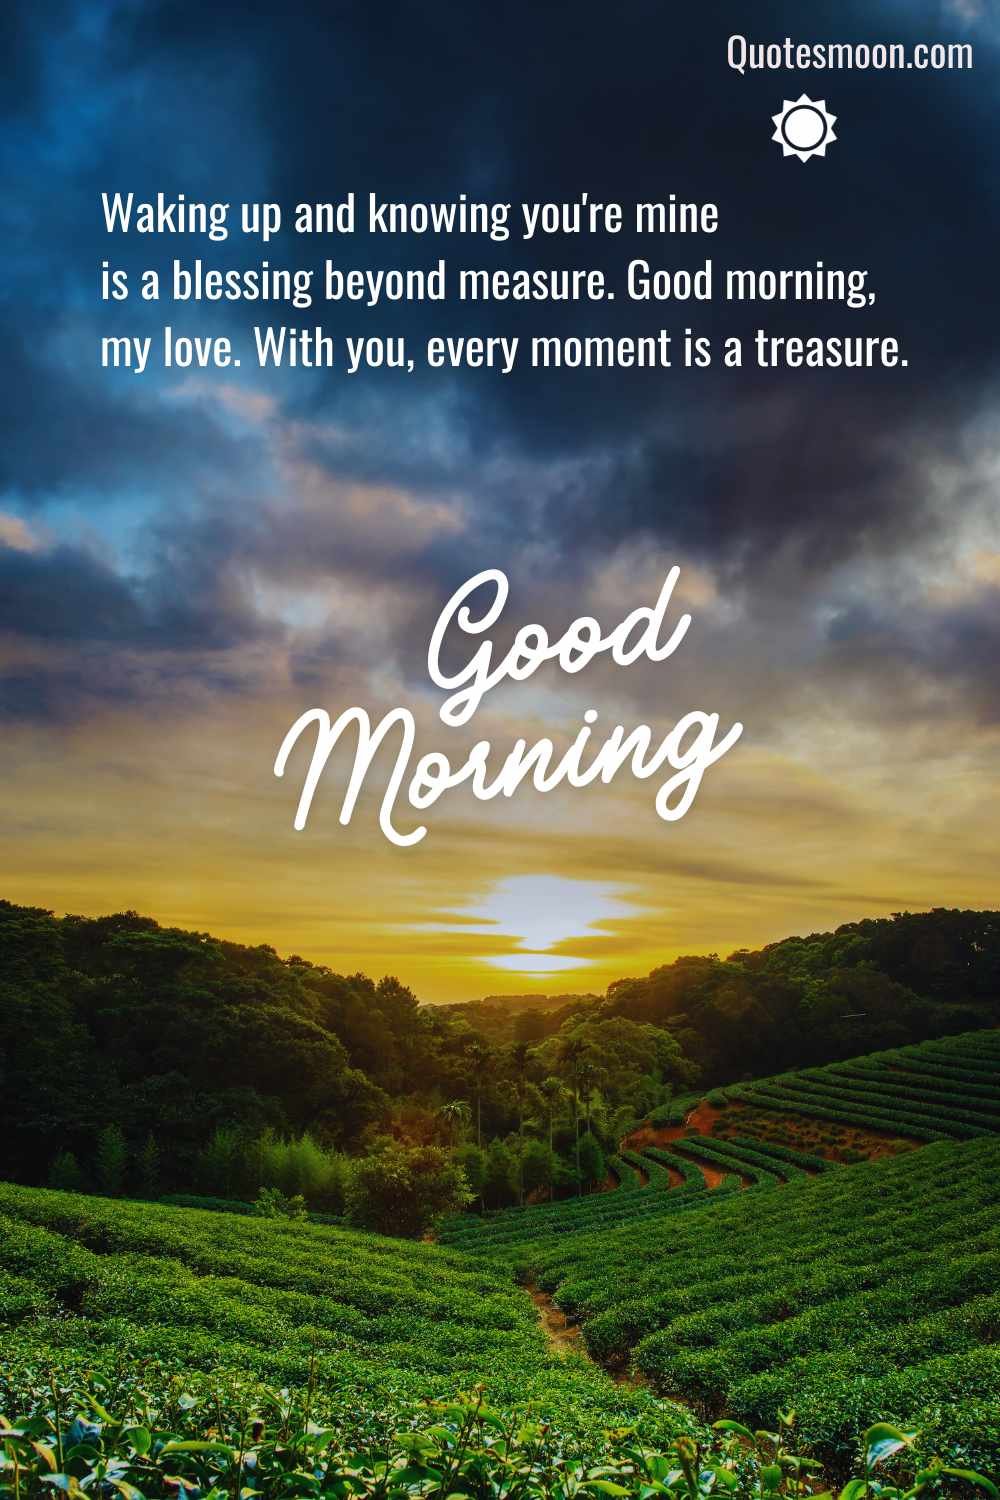 Inspirational good morning messages for someone special with image